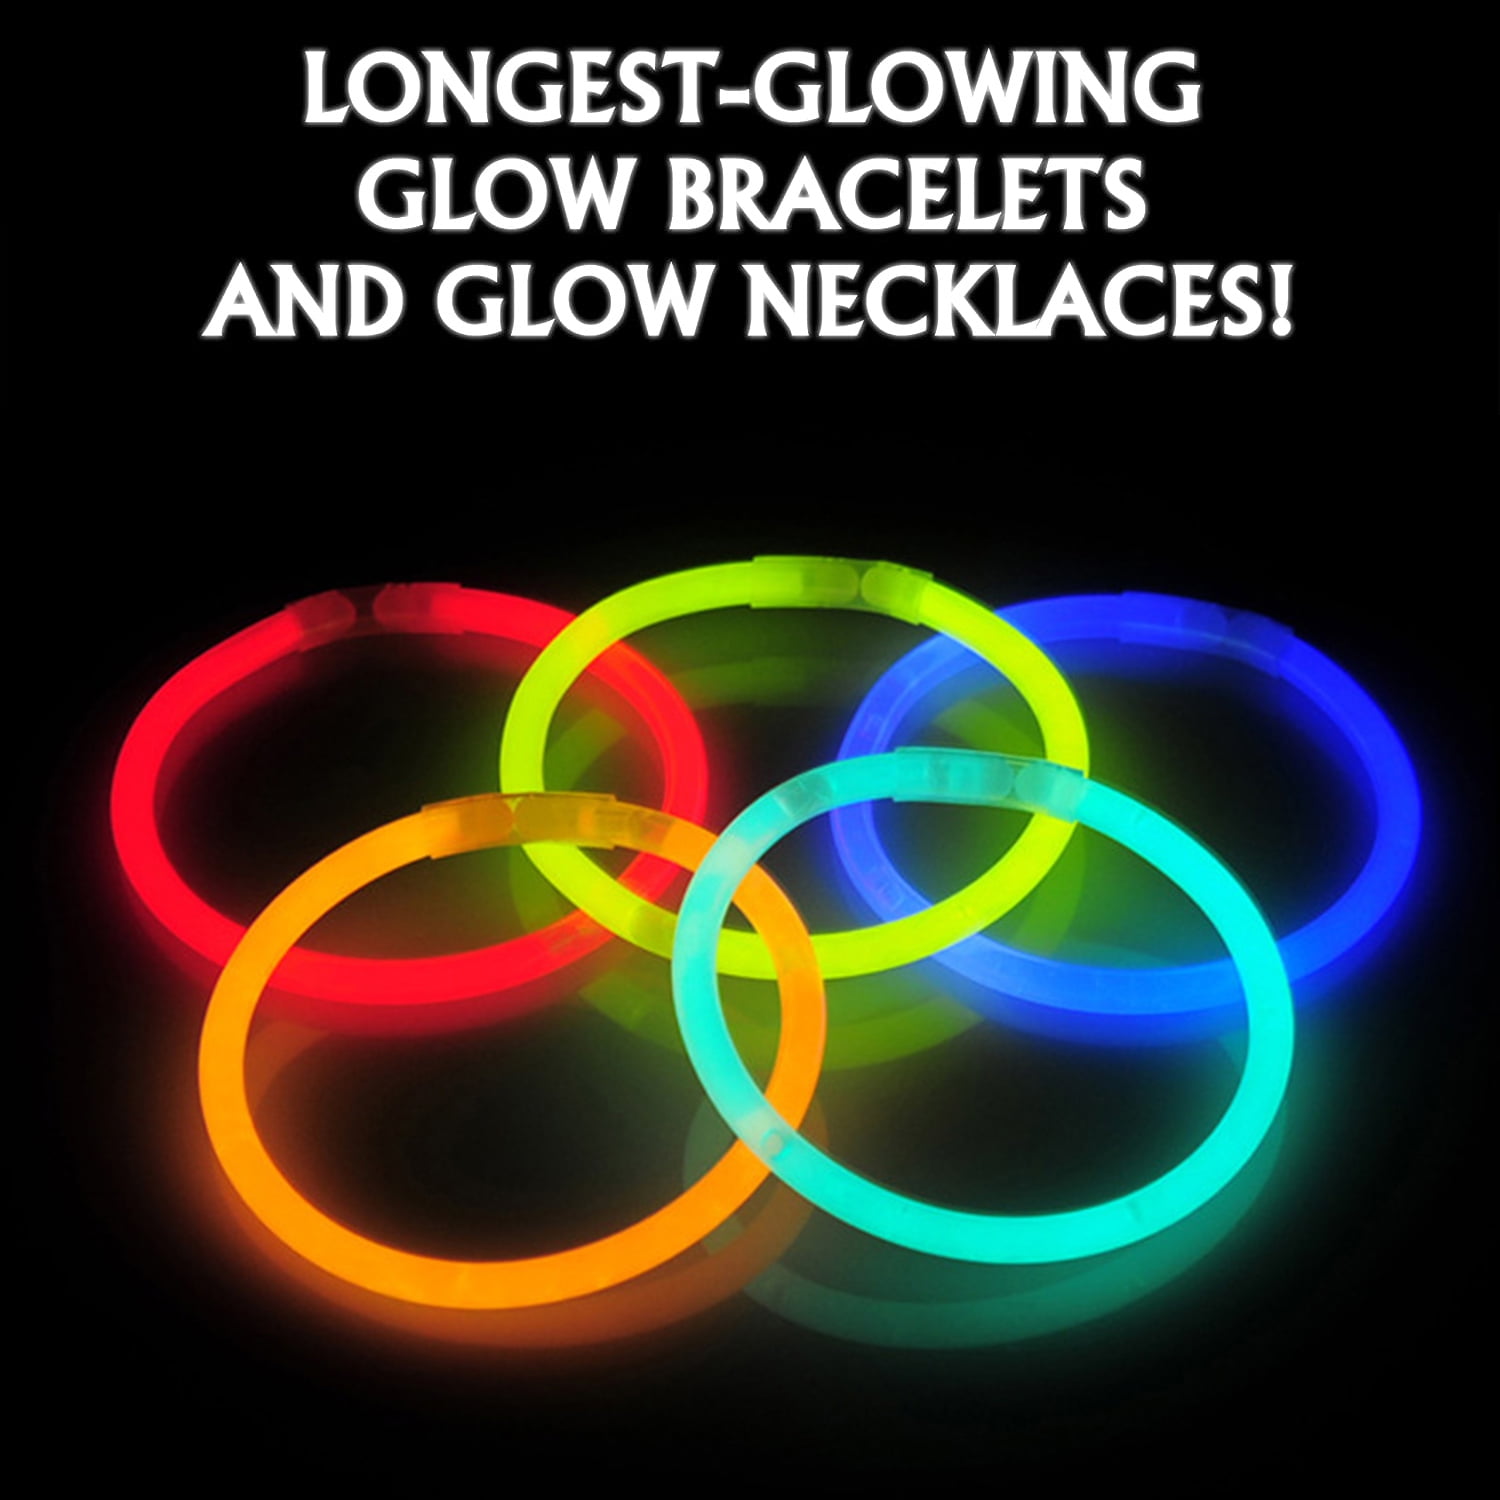 Glow in The Dark Party Supplies - 605 Pieces - Includes Connectors to  Create Necklaces, Bracelets, Glasses, Heart Glasses, Hats, Headbands,  Balls, Flowers - Glow in The Dark Party Favors - Dragon